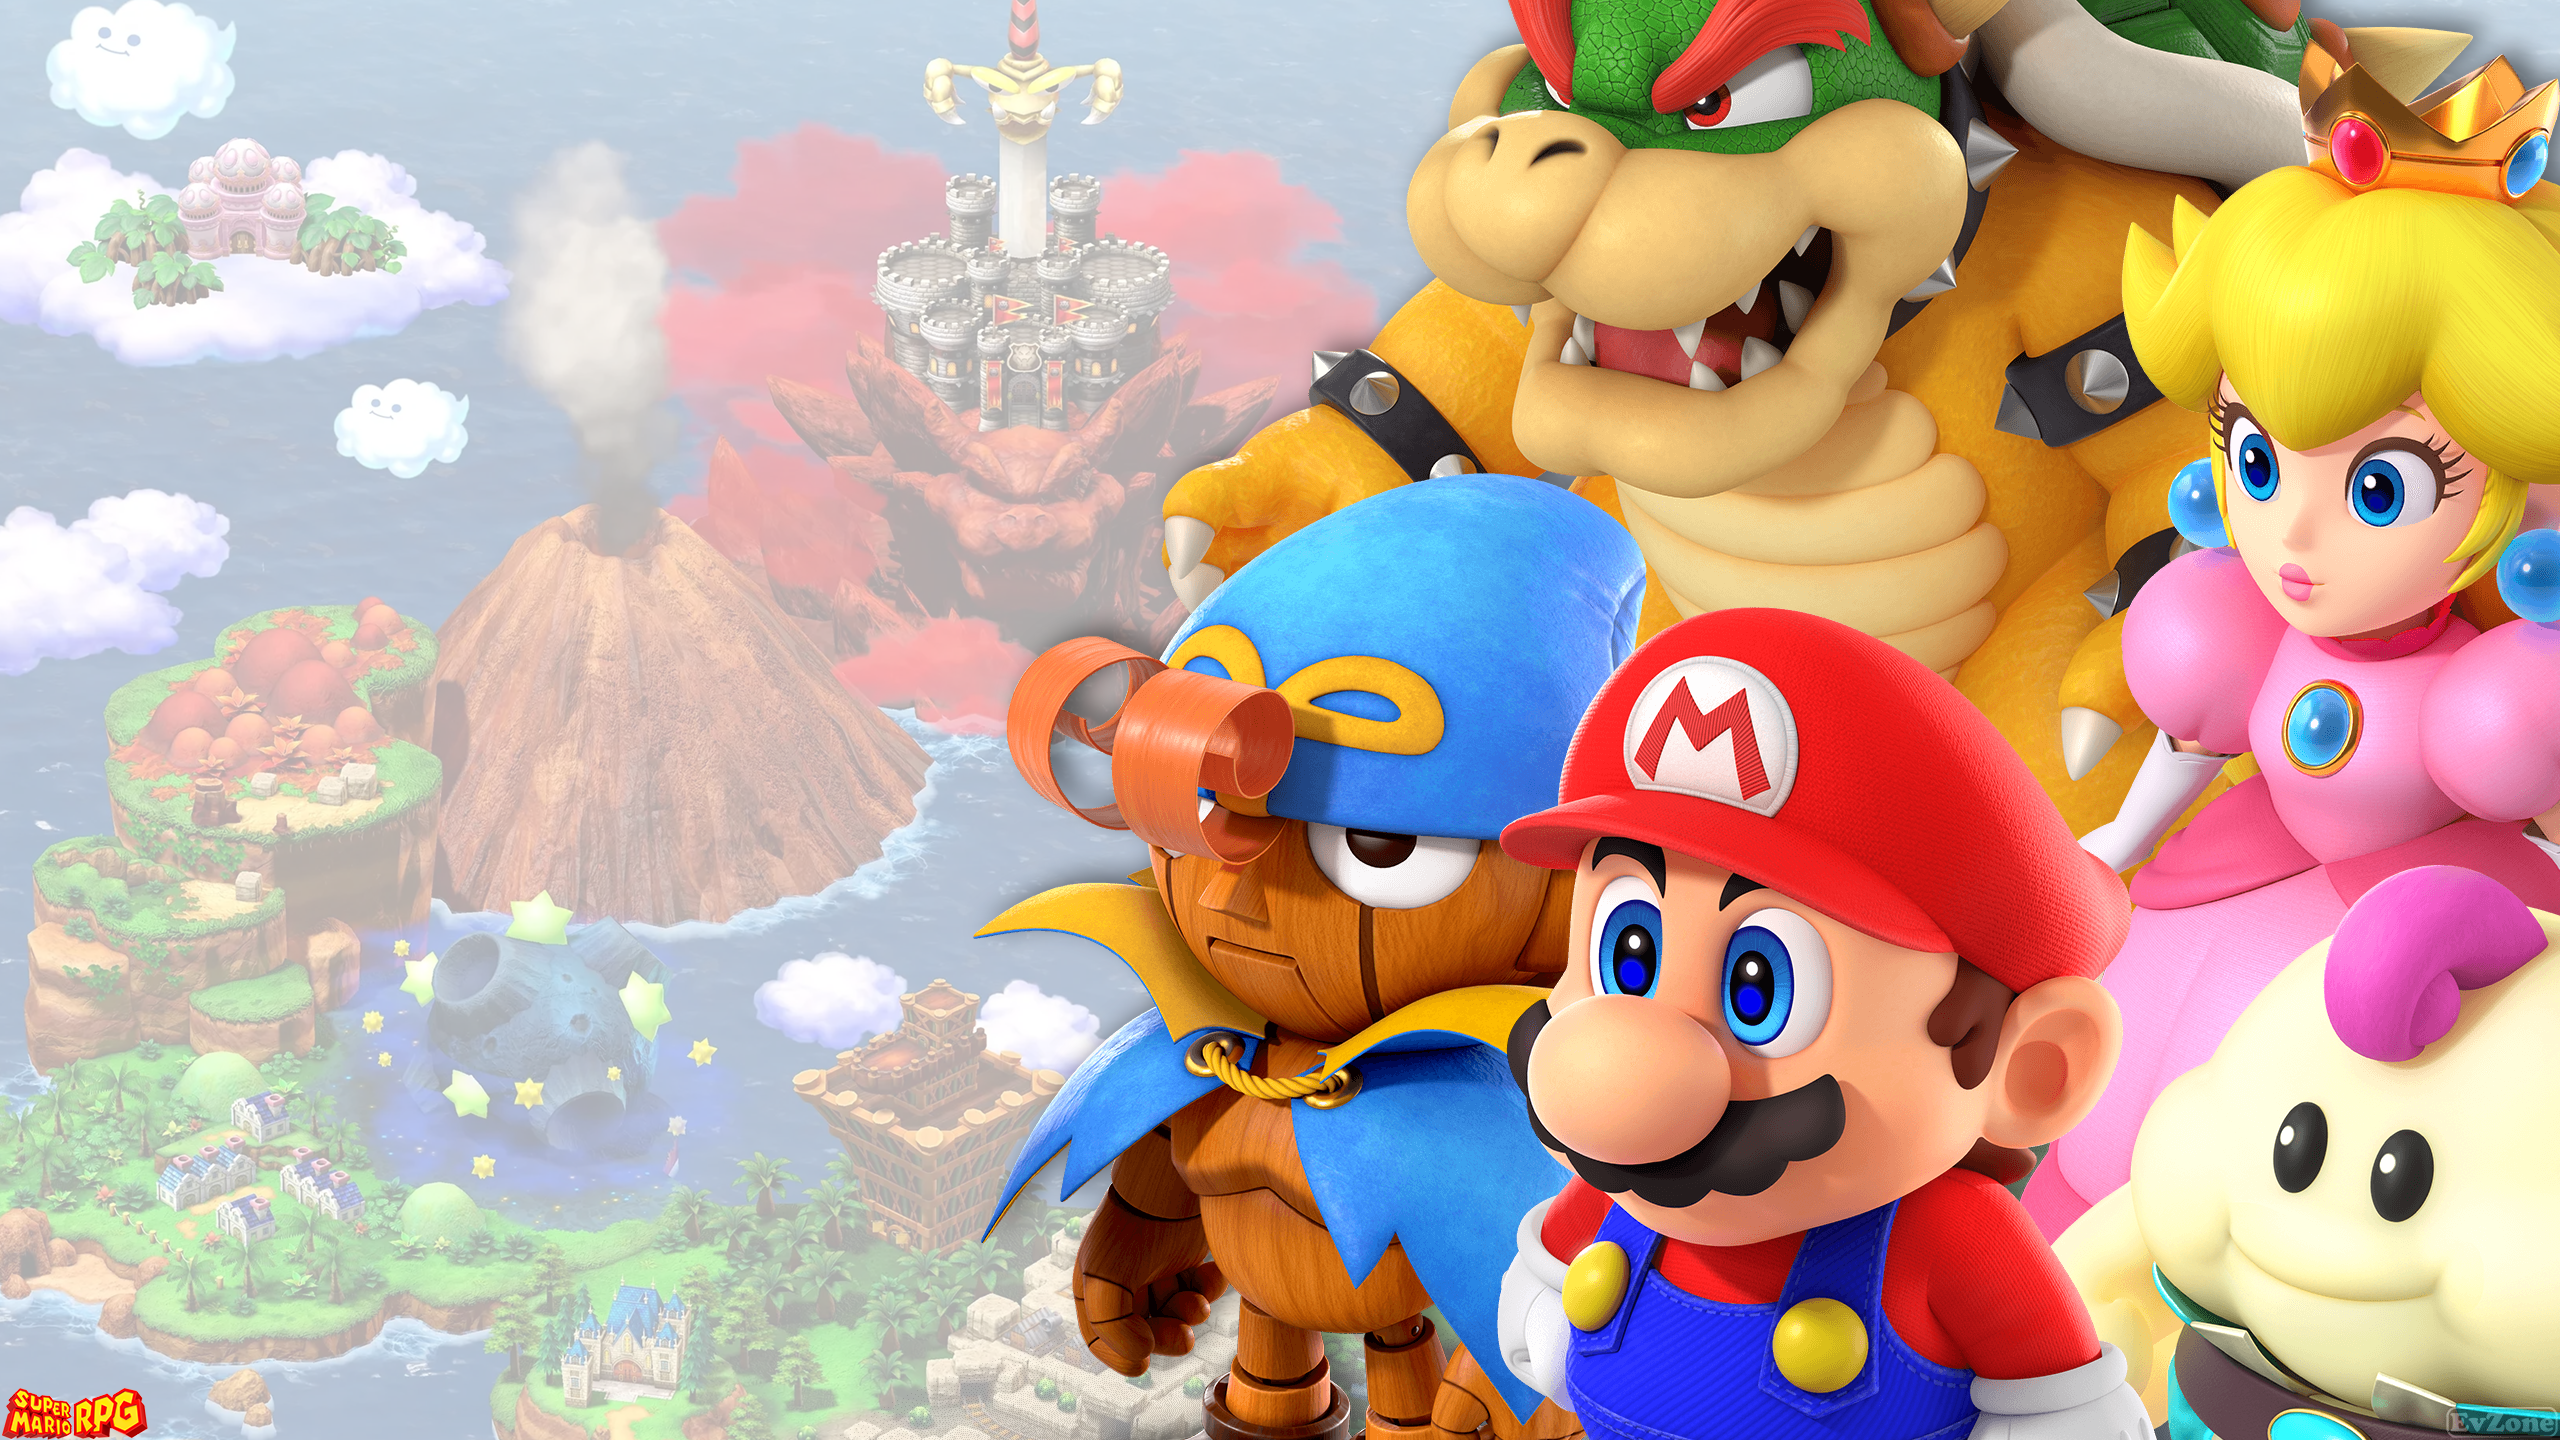 General 2560x1440 super mario rpg Mario Bowser Princess Peach digital art video games watermarked crown hat video game characters moustache looking away title volcano clouds landscape smoke water Mallow (Super Mario) Geno (Super Mario)